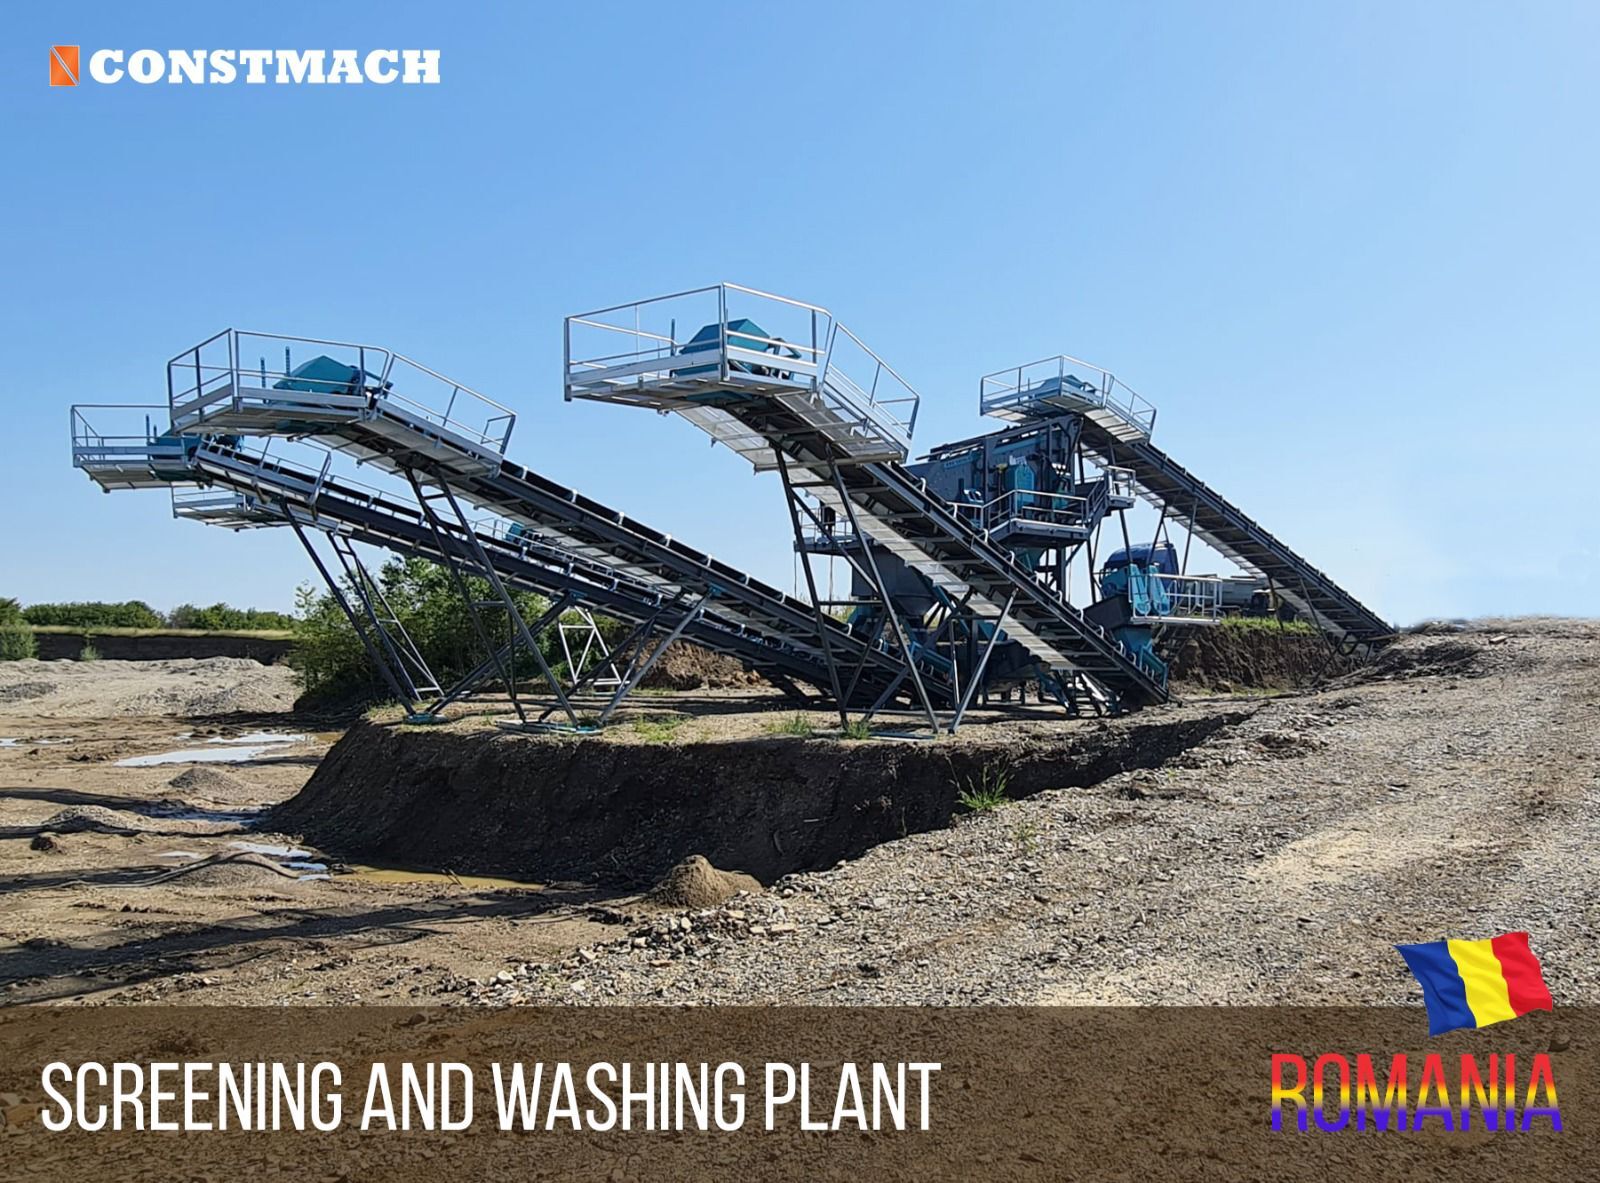 Constmach Concrete Batching Plants & Crushing and Screening Plants - myynti-ilmoitukset undefined: kuva Constmach Concrete Batching Plants & Crushing and Screening Plants - myynti-ilmoitukset undefined